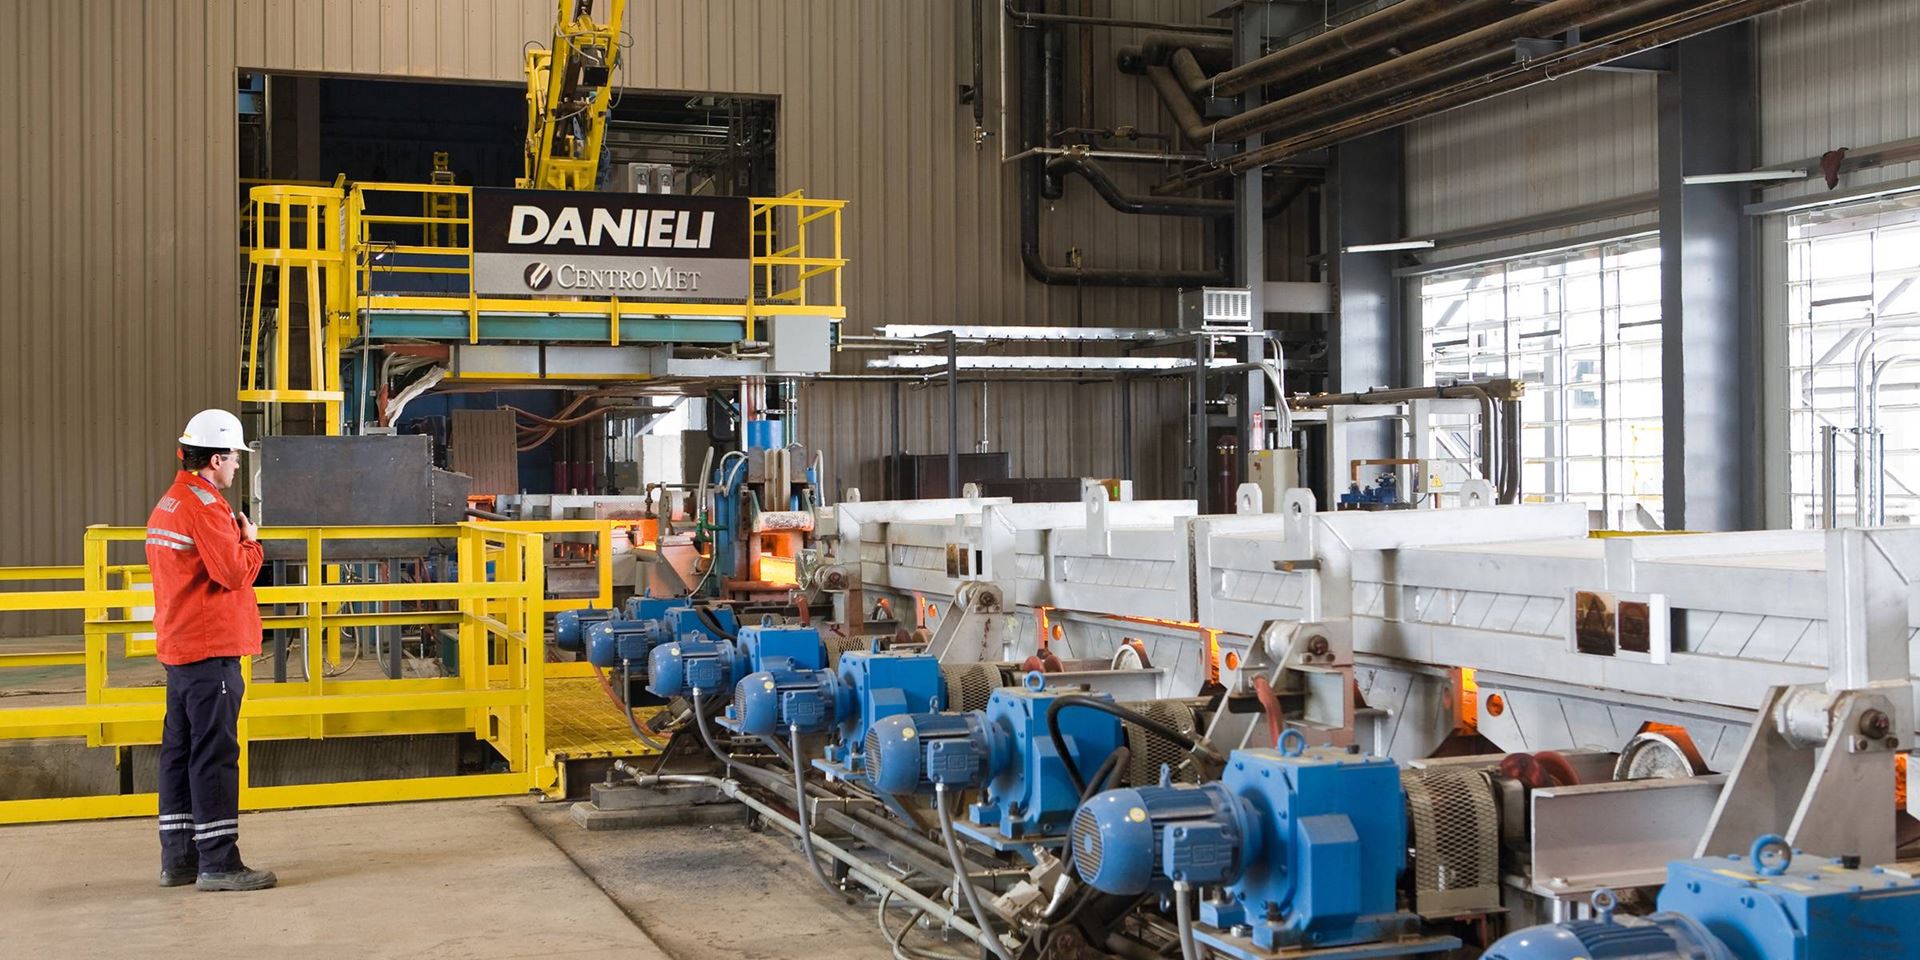 Italian Danieli plans to expand its metallurgical division